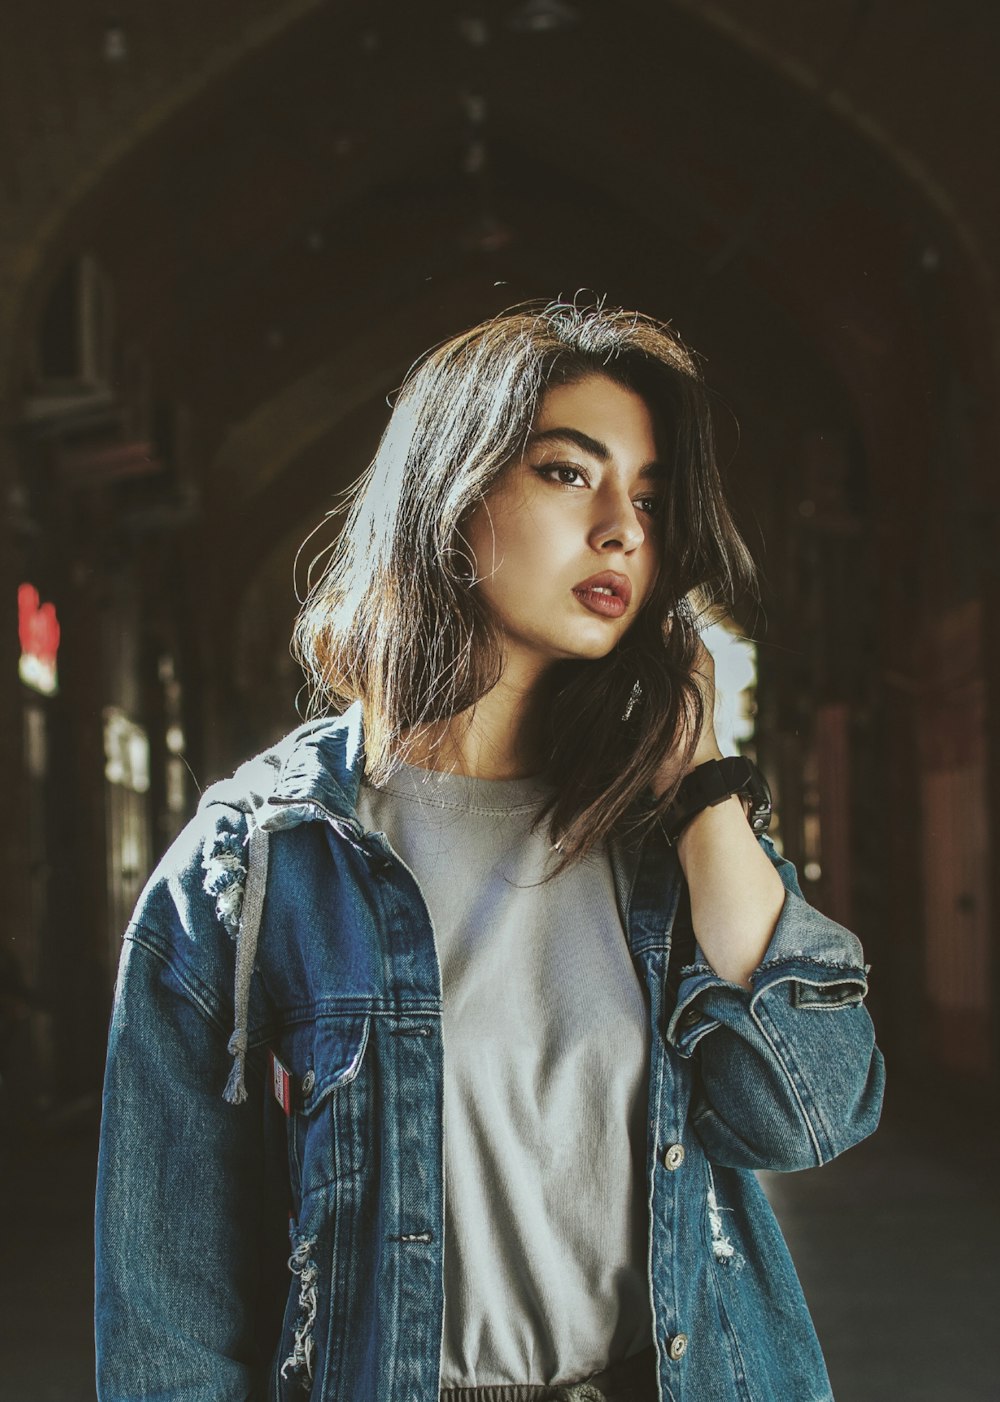 A woman wearing a jean jacket and a white t - shirt photo – Free Apparel  Image on Unsplash